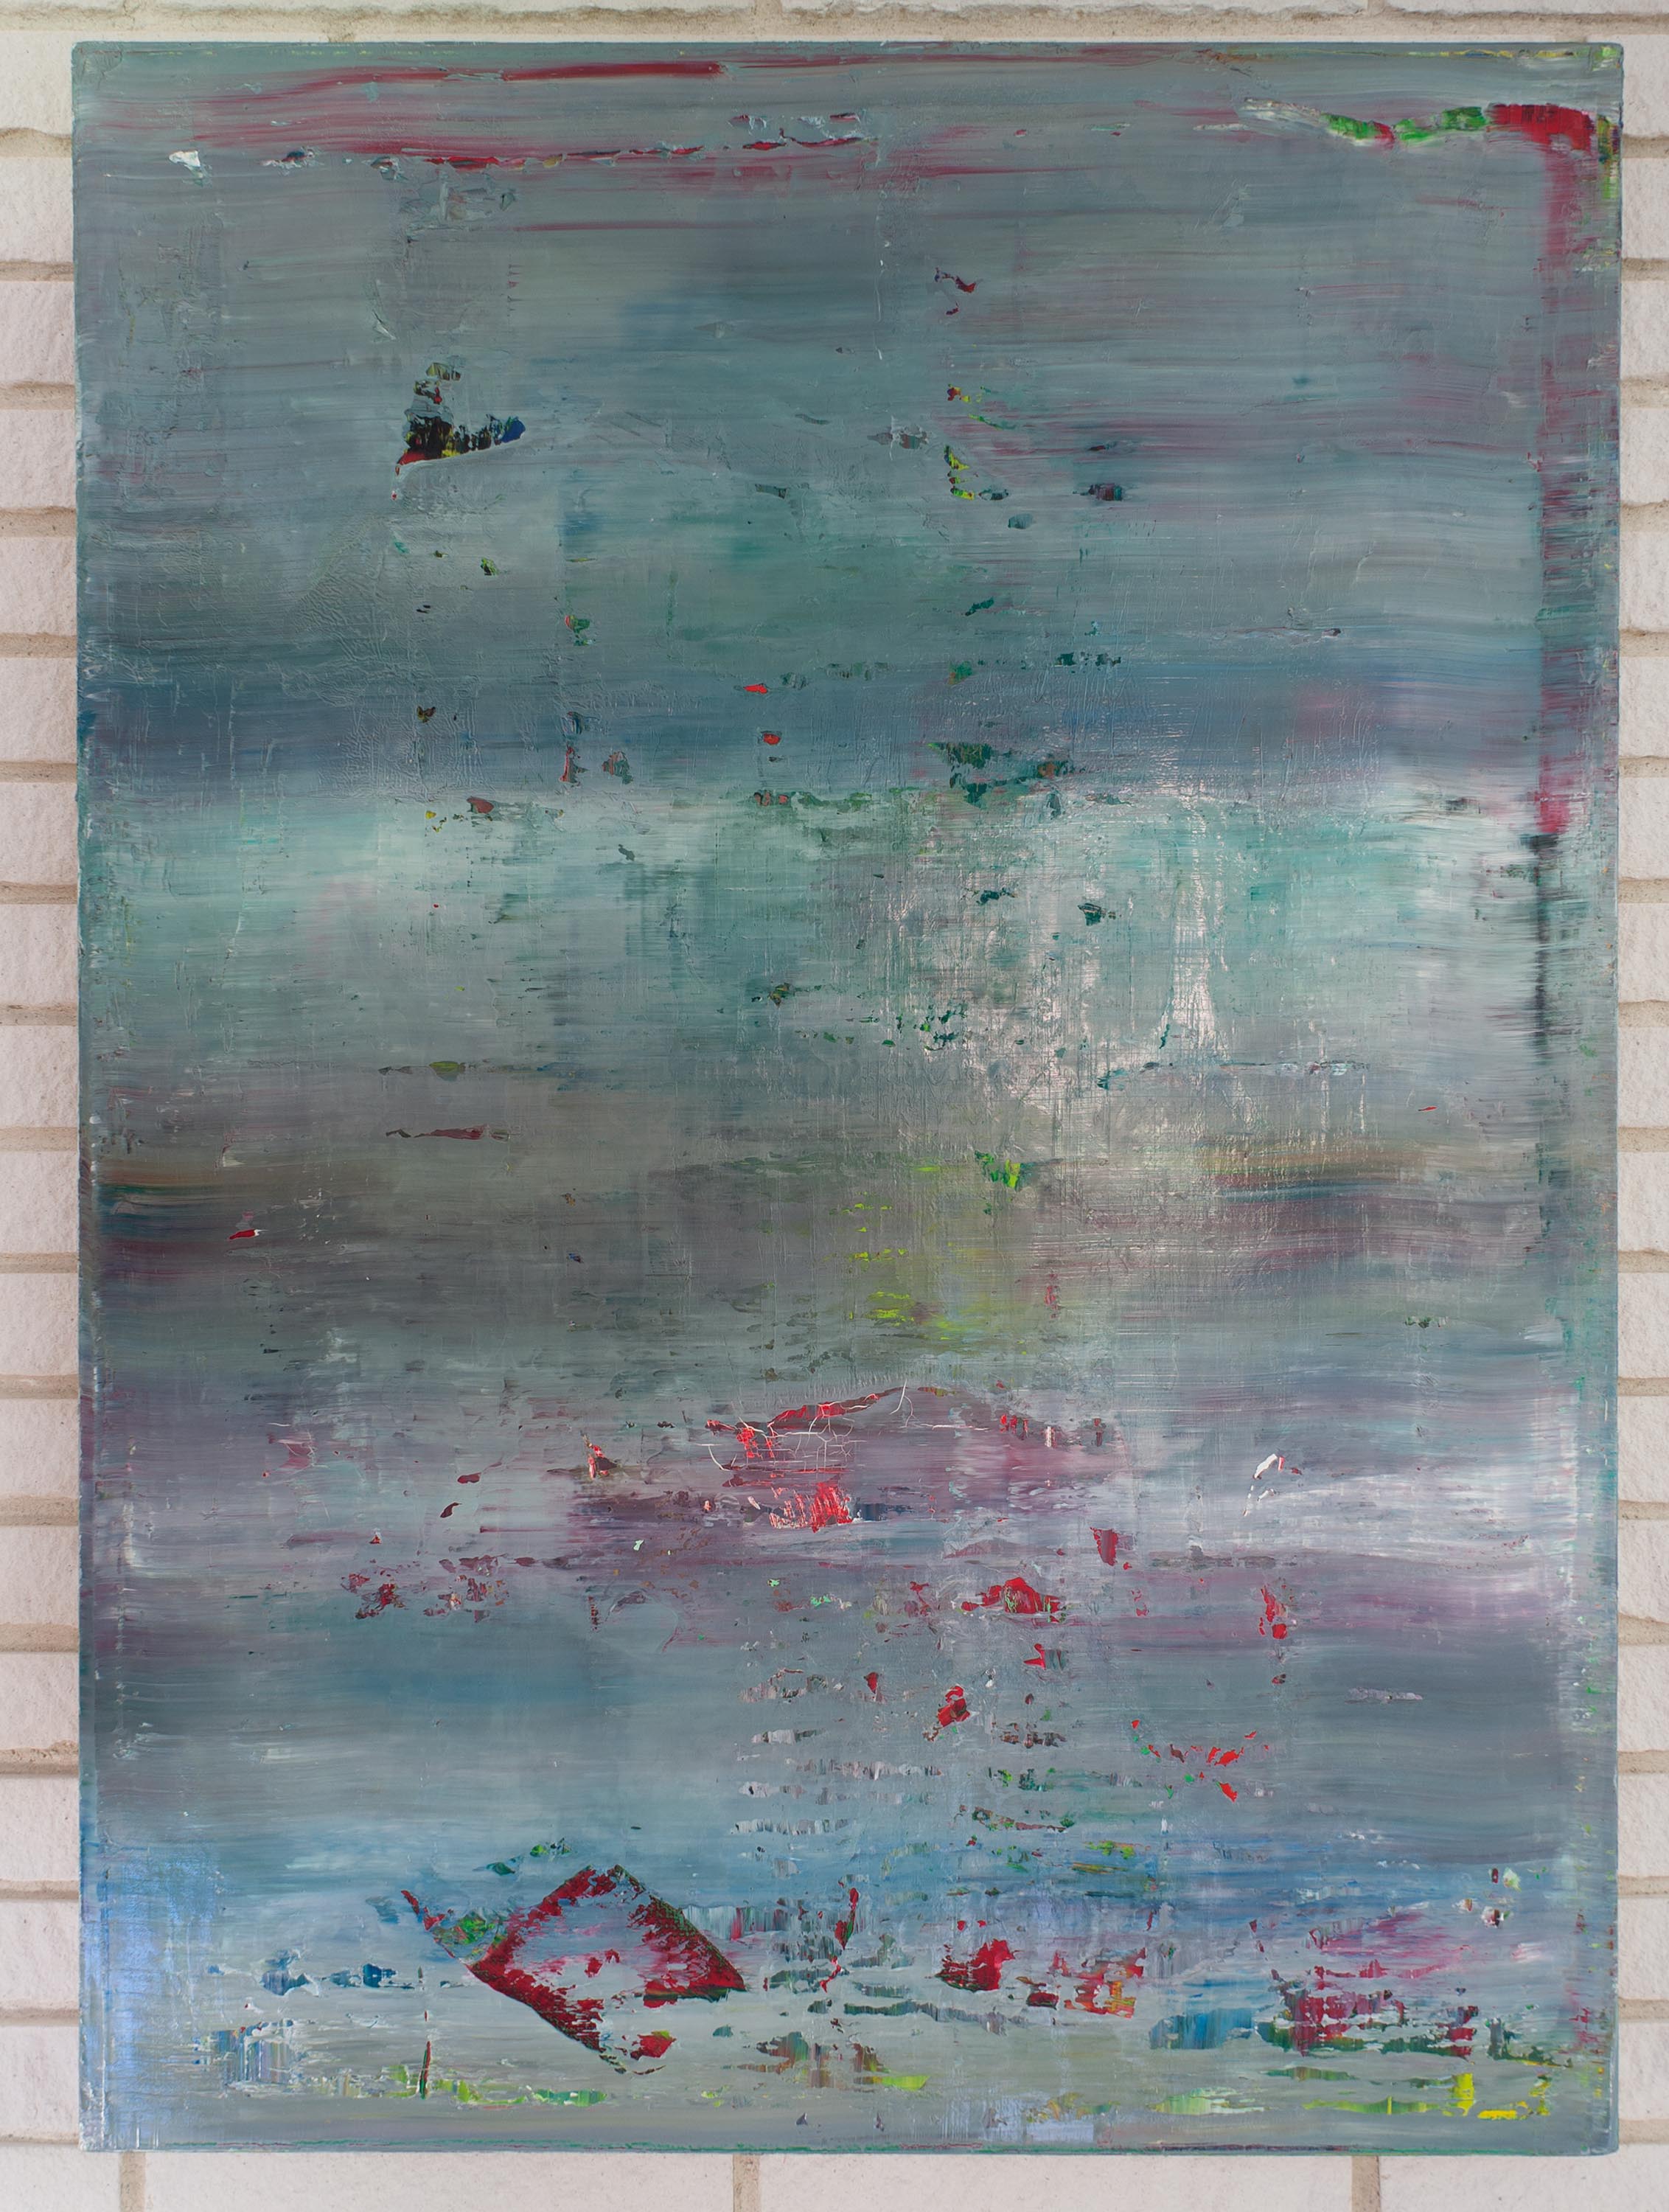 Gerhard Richter, “Abstract Painting (Abstraktes Bild),” 1990, oil on canvas, Partial Gift of Dr. and Mrs. Karl Salatka